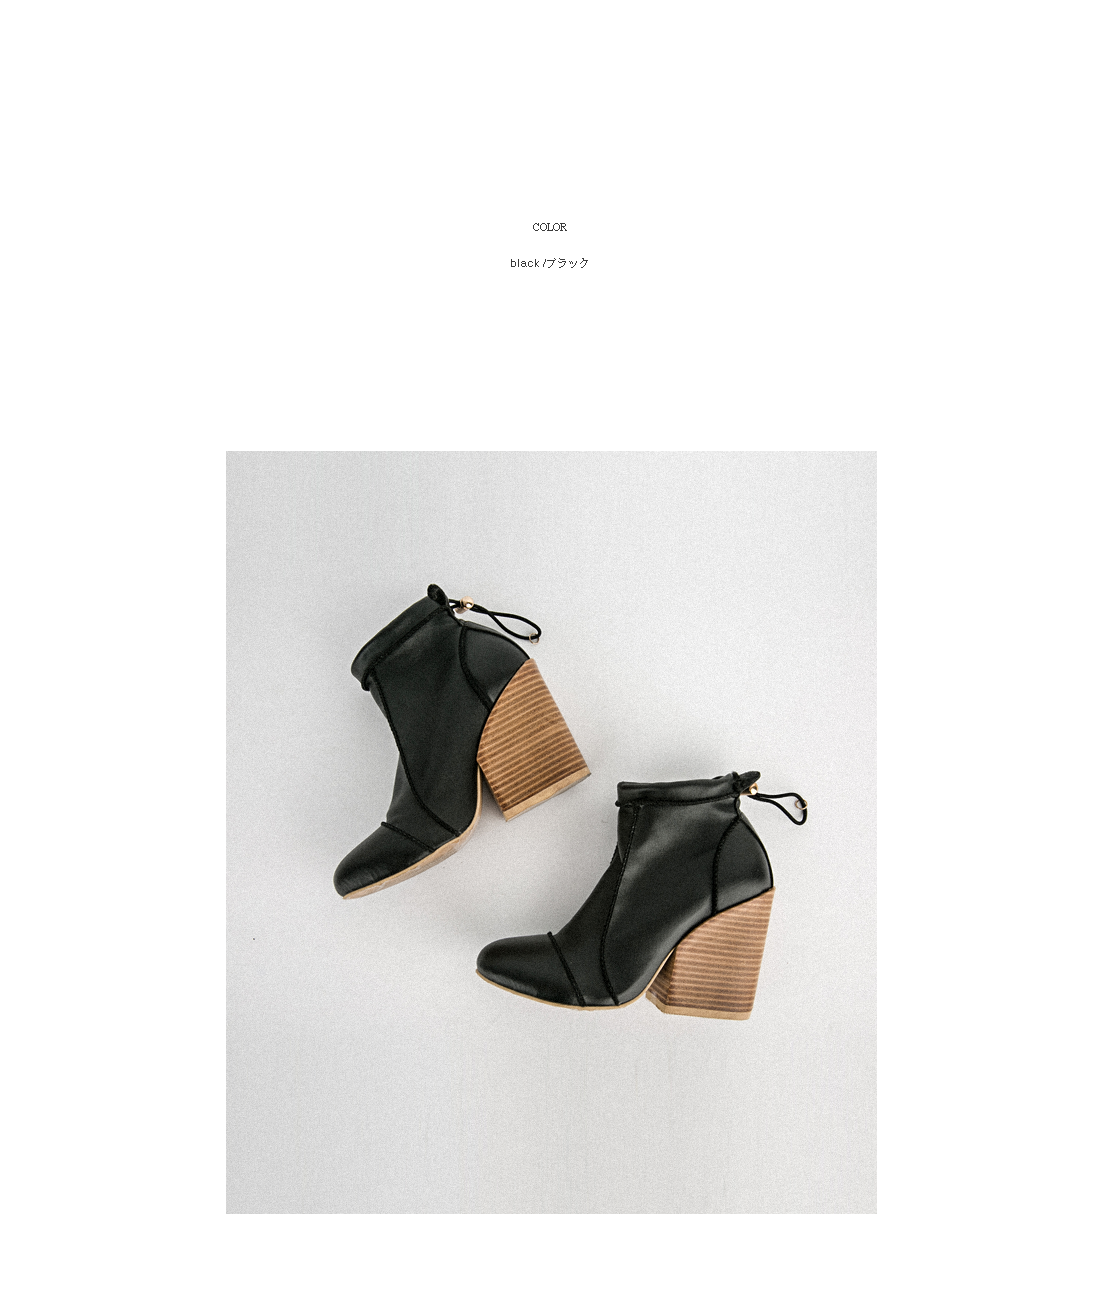 stoper ankle boots|coii